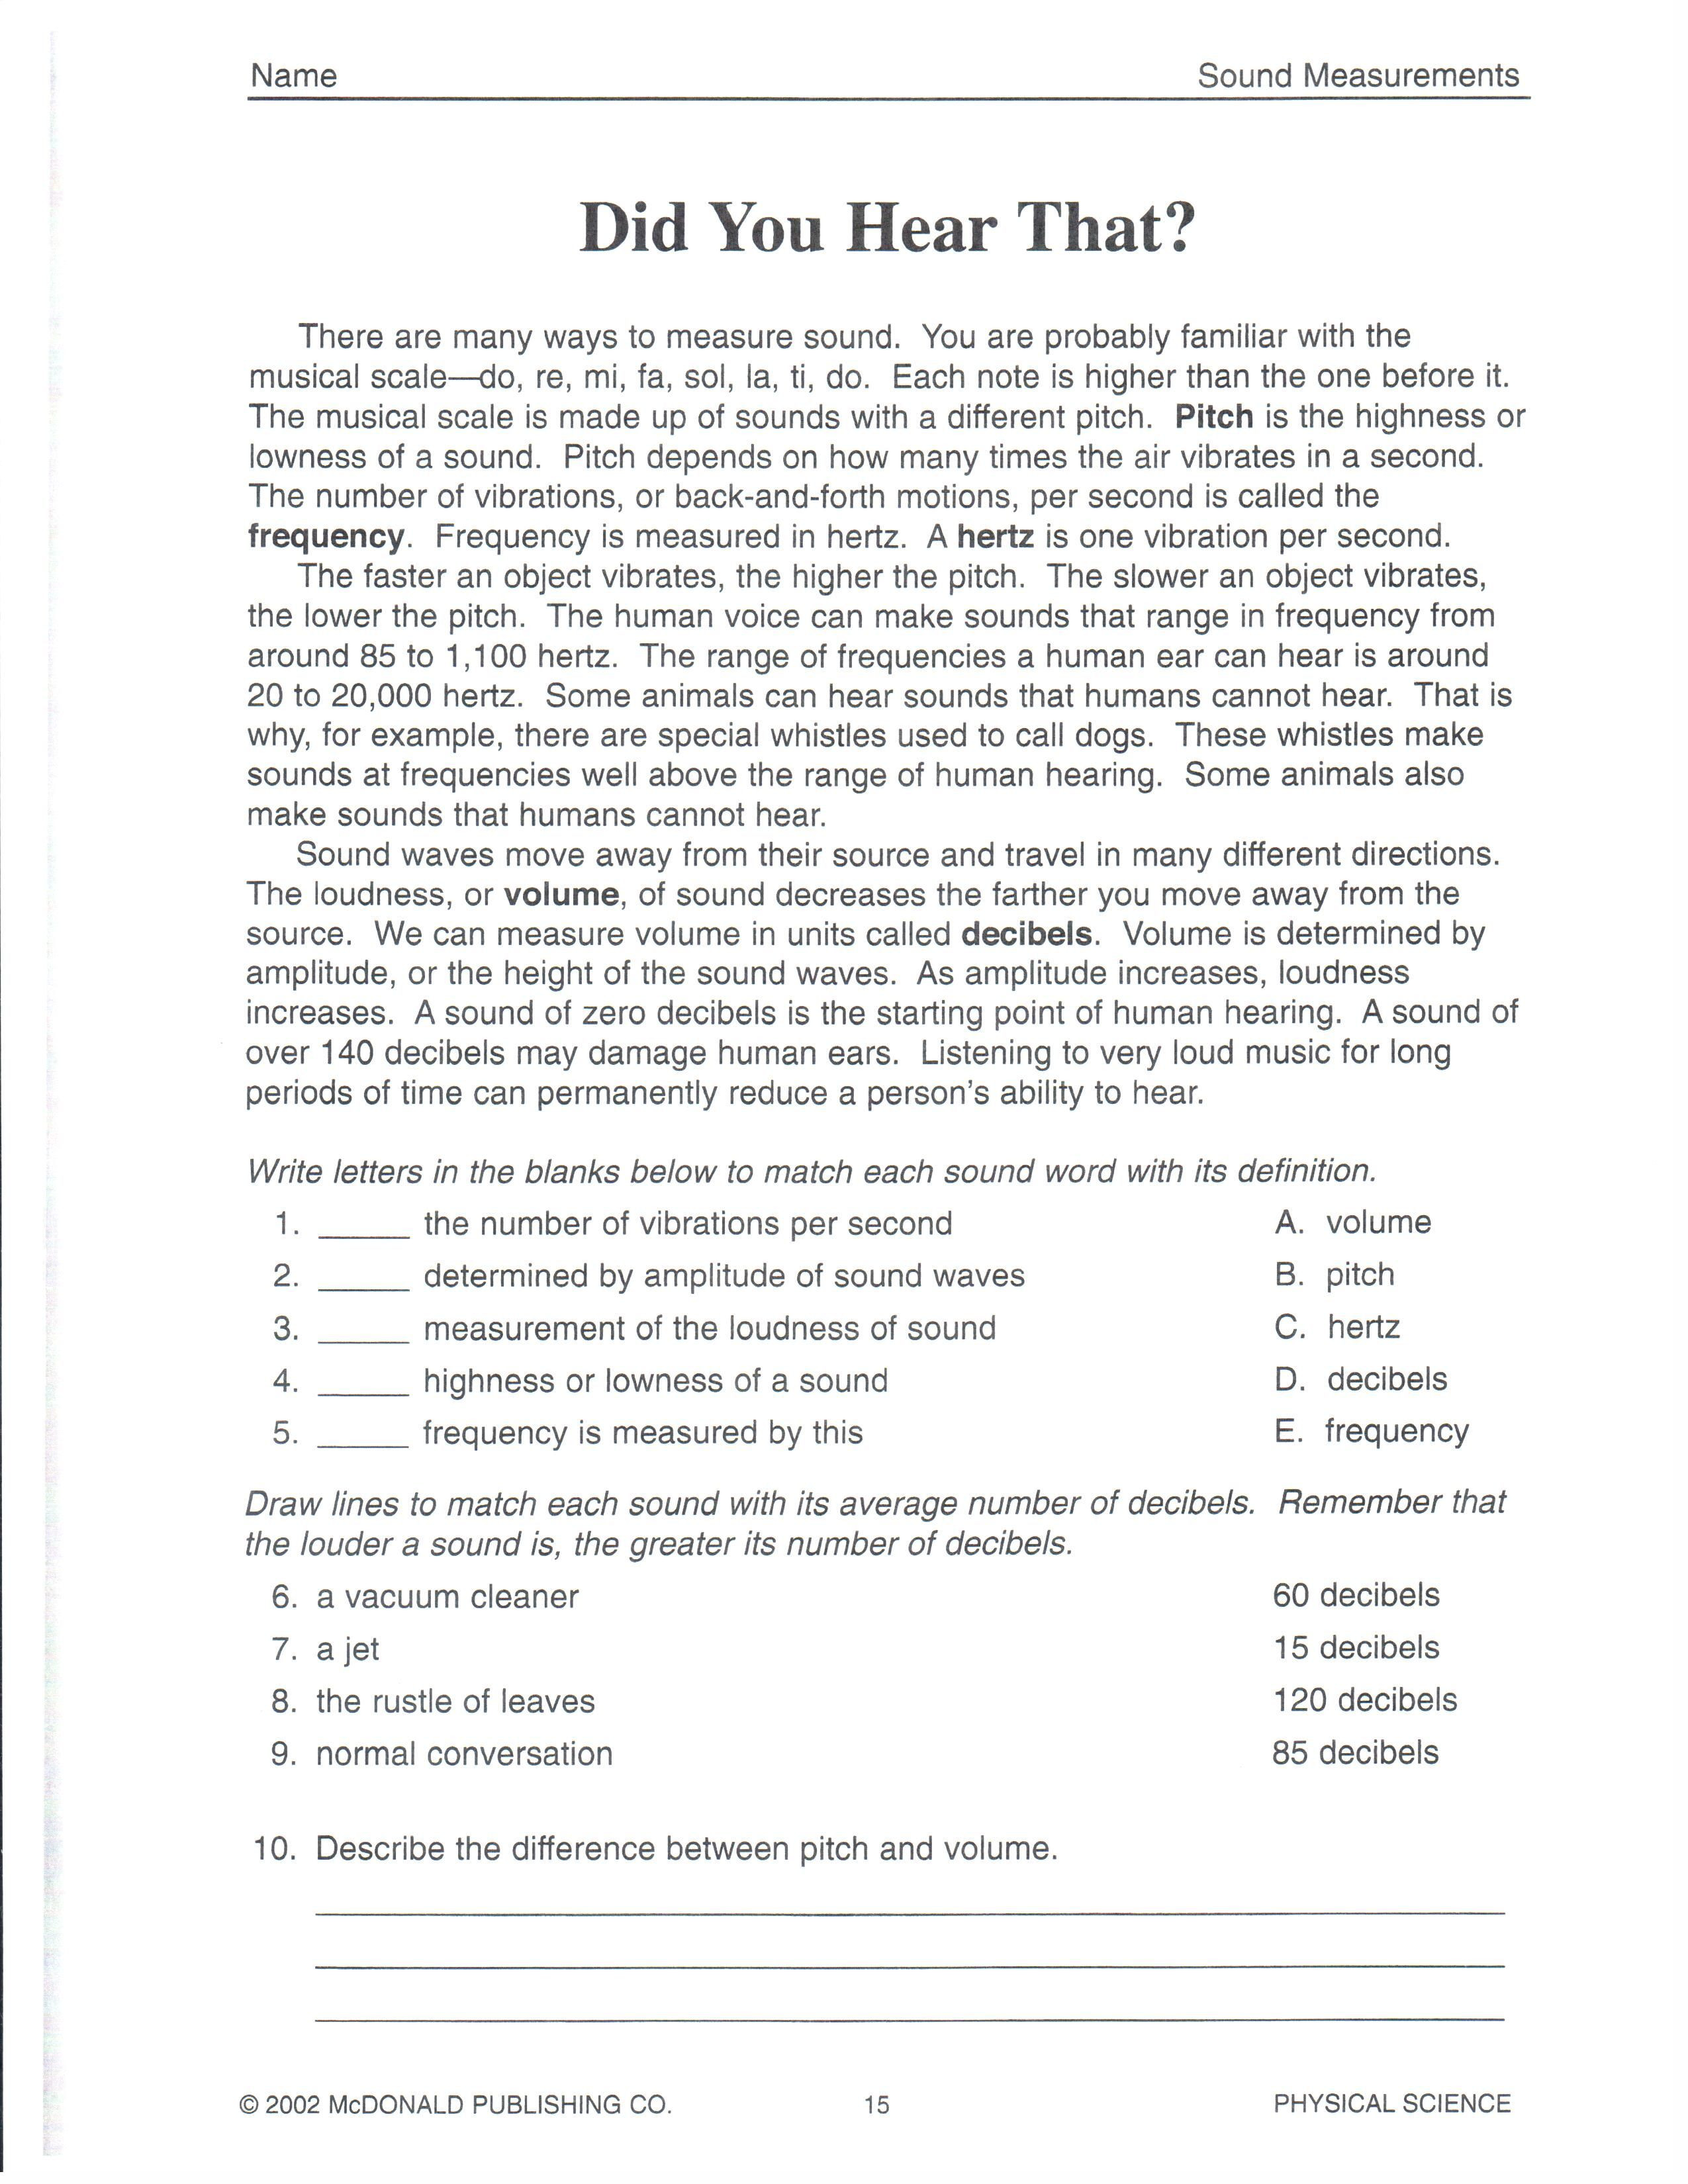 Science Worksheets for 8th Grade Physical Science Did You Hear that 101roxm 2 5503 300